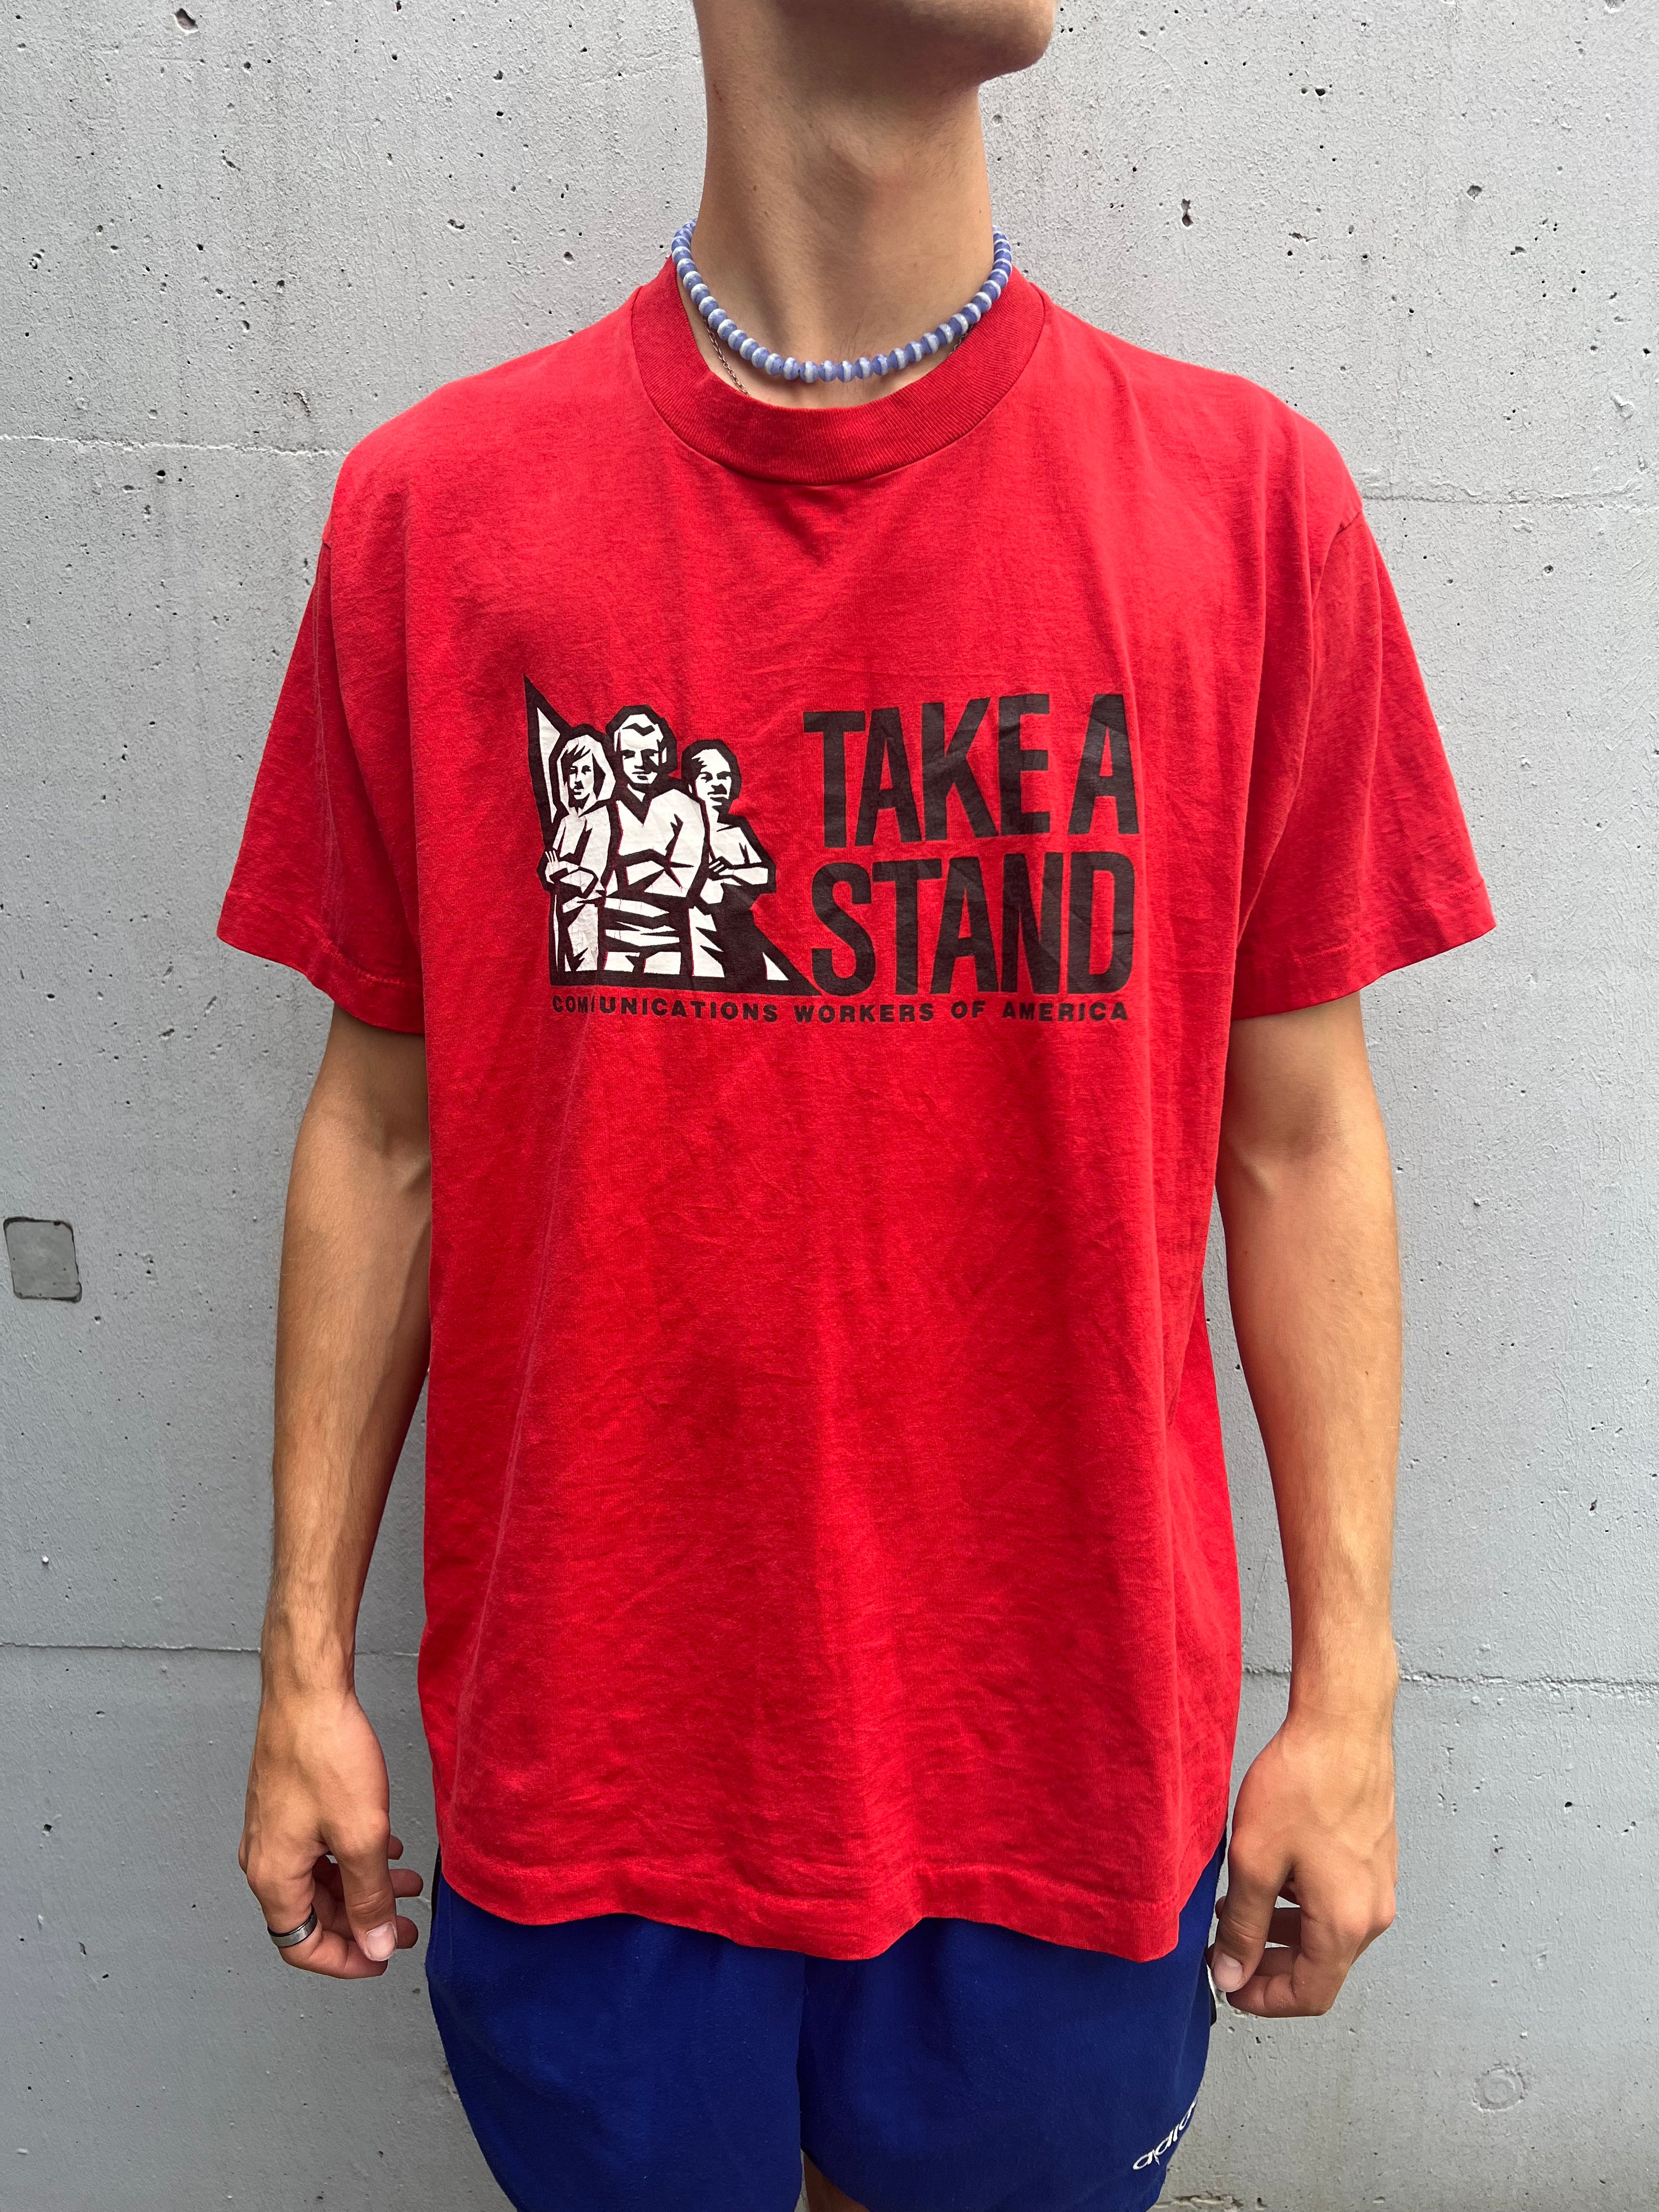 Vintage 90s T-Shirt take a stand communications workers of america (XL/XXL)